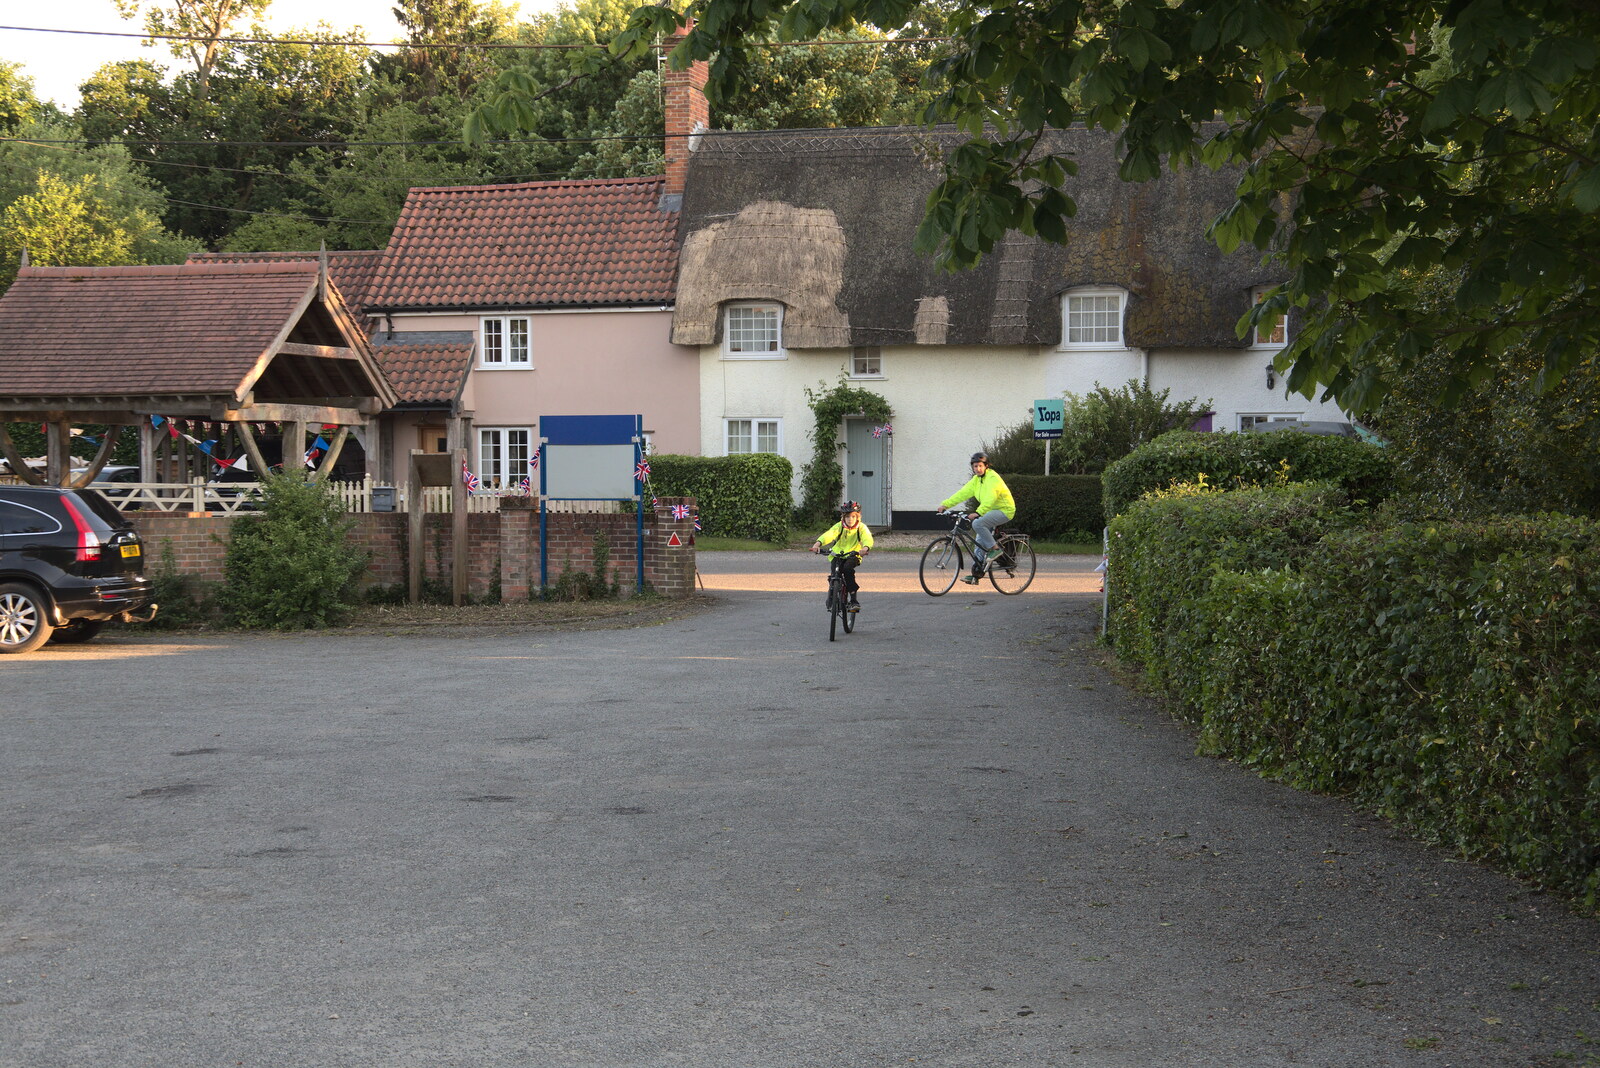 Harry and Isobel cycle up to the village hall from The Gislingham Silver Band at Barningham, Suffolk - 3rd June 2022